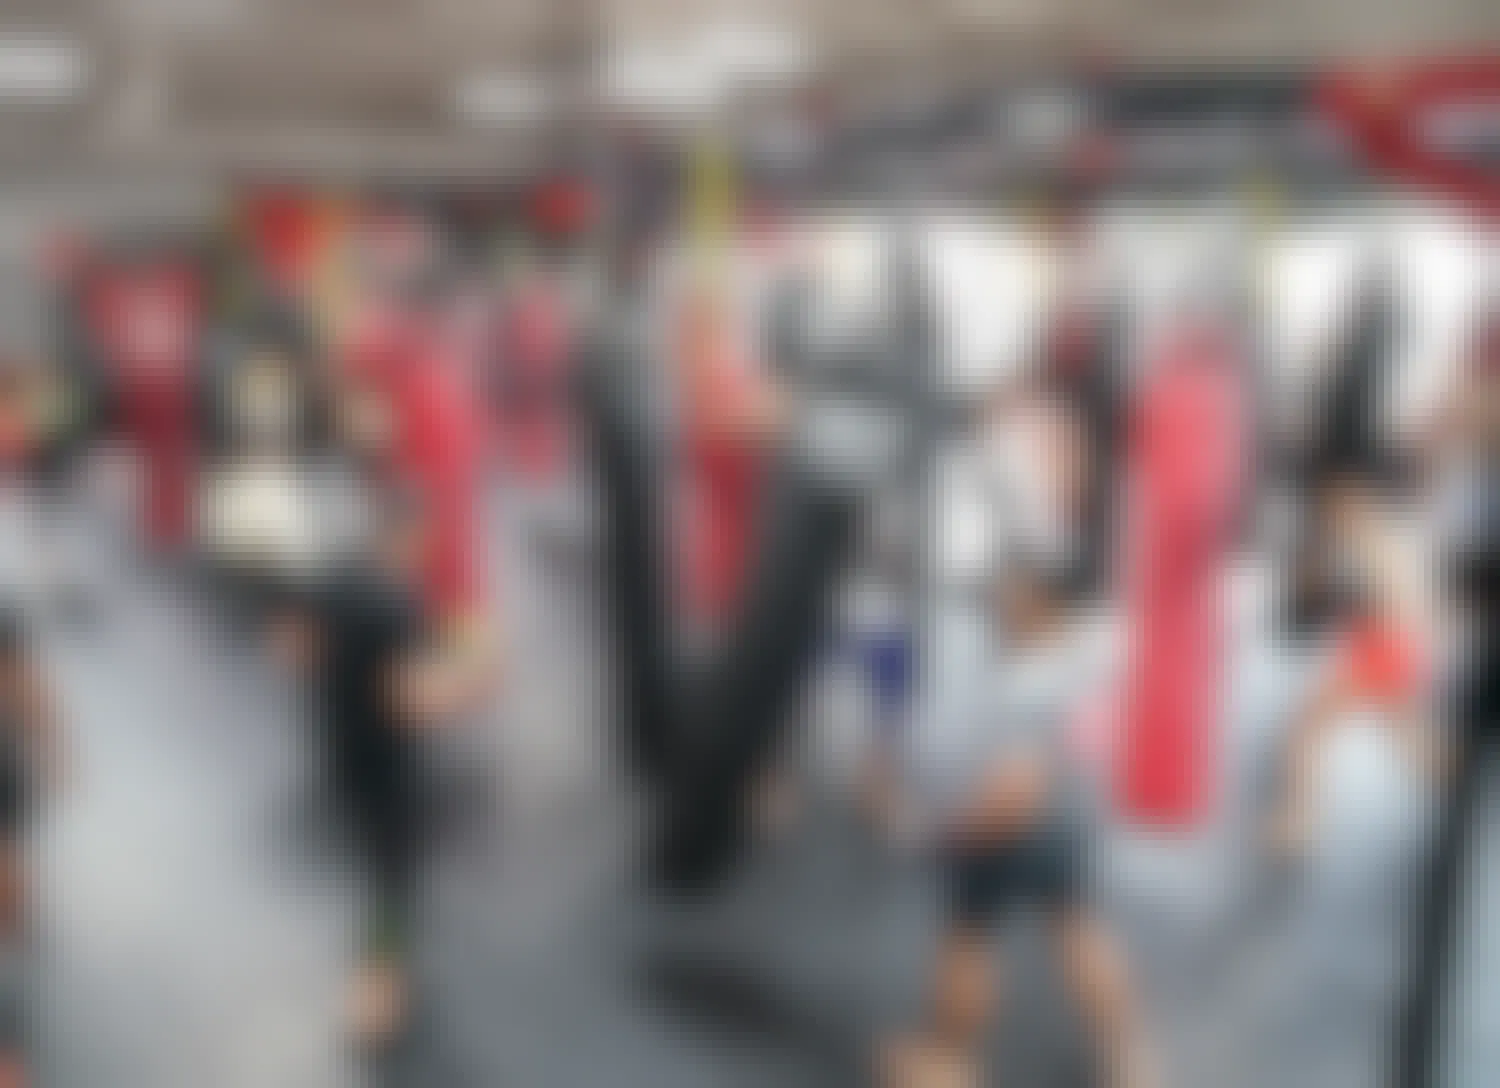 people in boxing class at ufc gym location